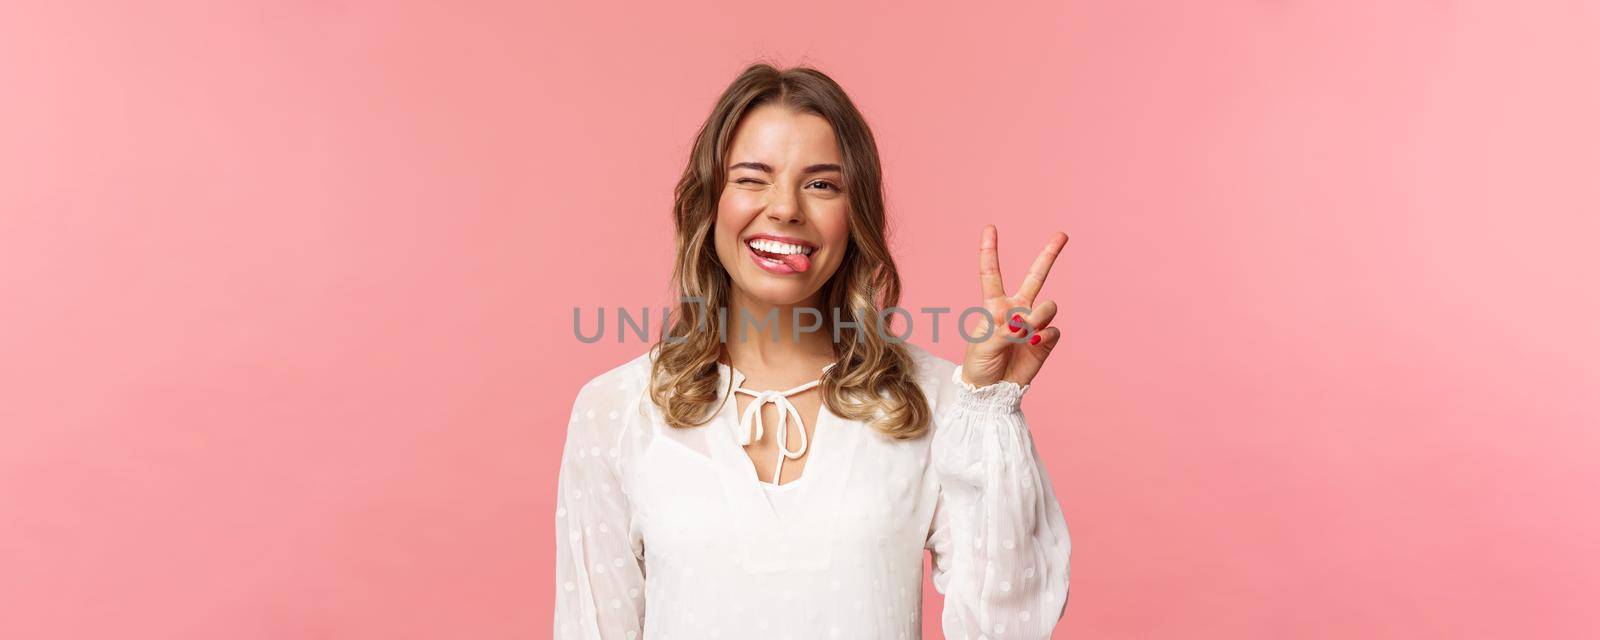 Close-up portrait of friendly joyful blond girl in white dress, sending positive vibes, smiling pleased and wink, stick tongue showing peace sign, looking kawaii over pink background.